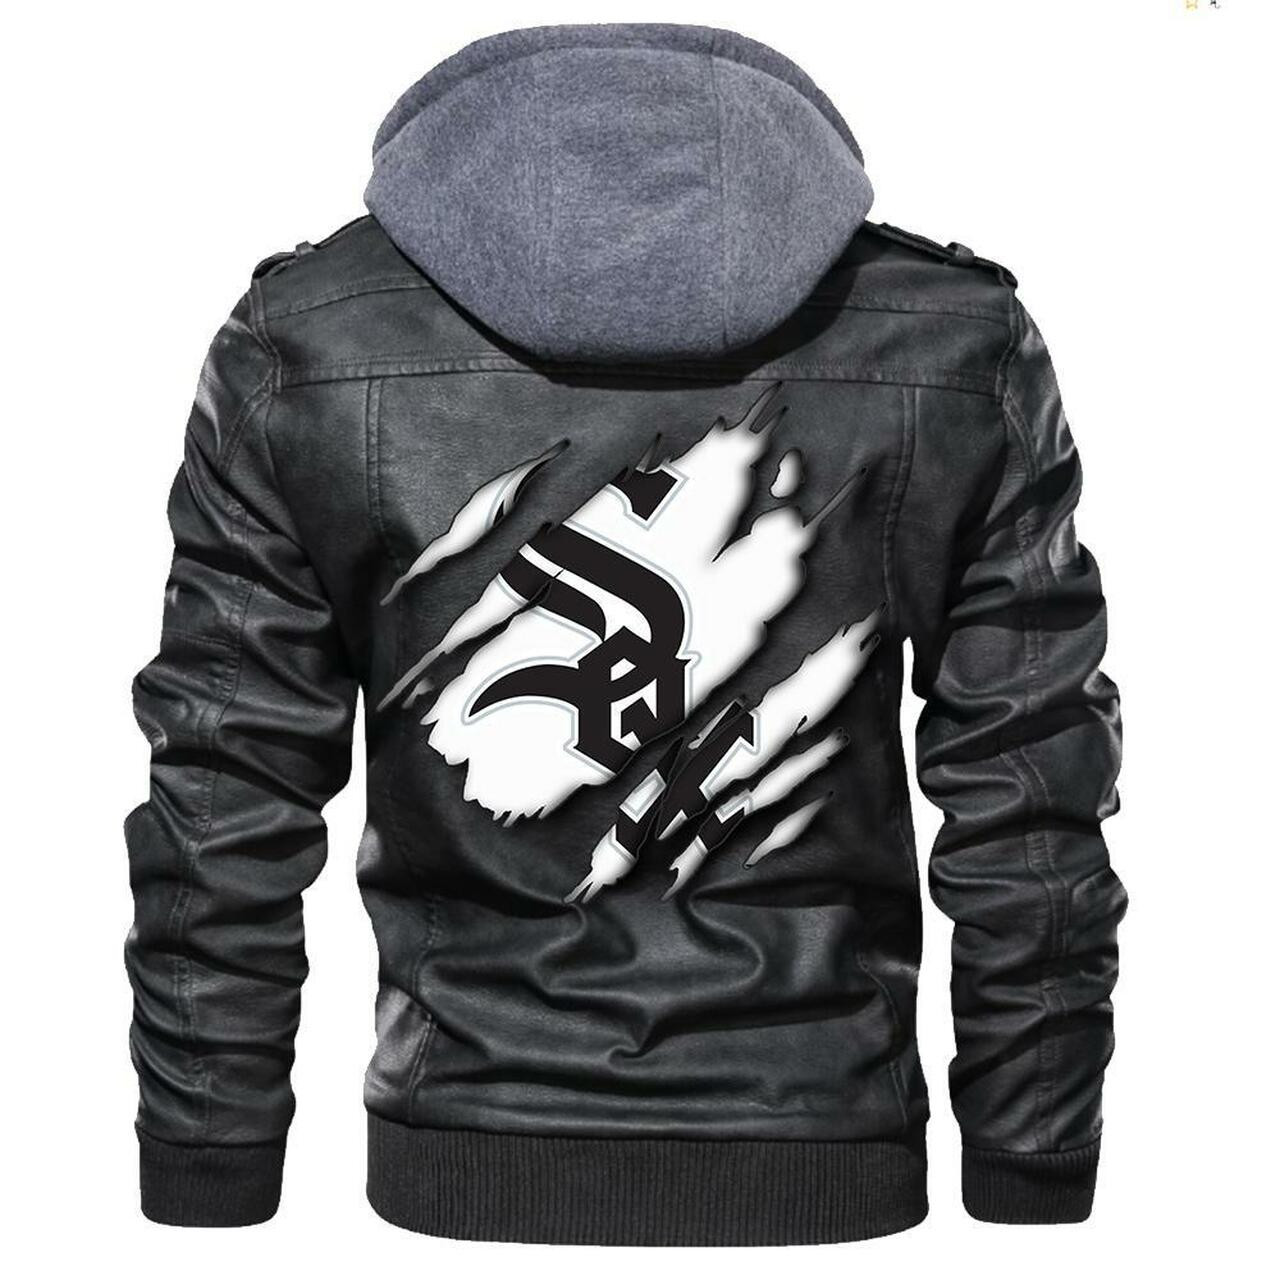 This leather Jacket will look great on you and make you stand out from the crowd 371